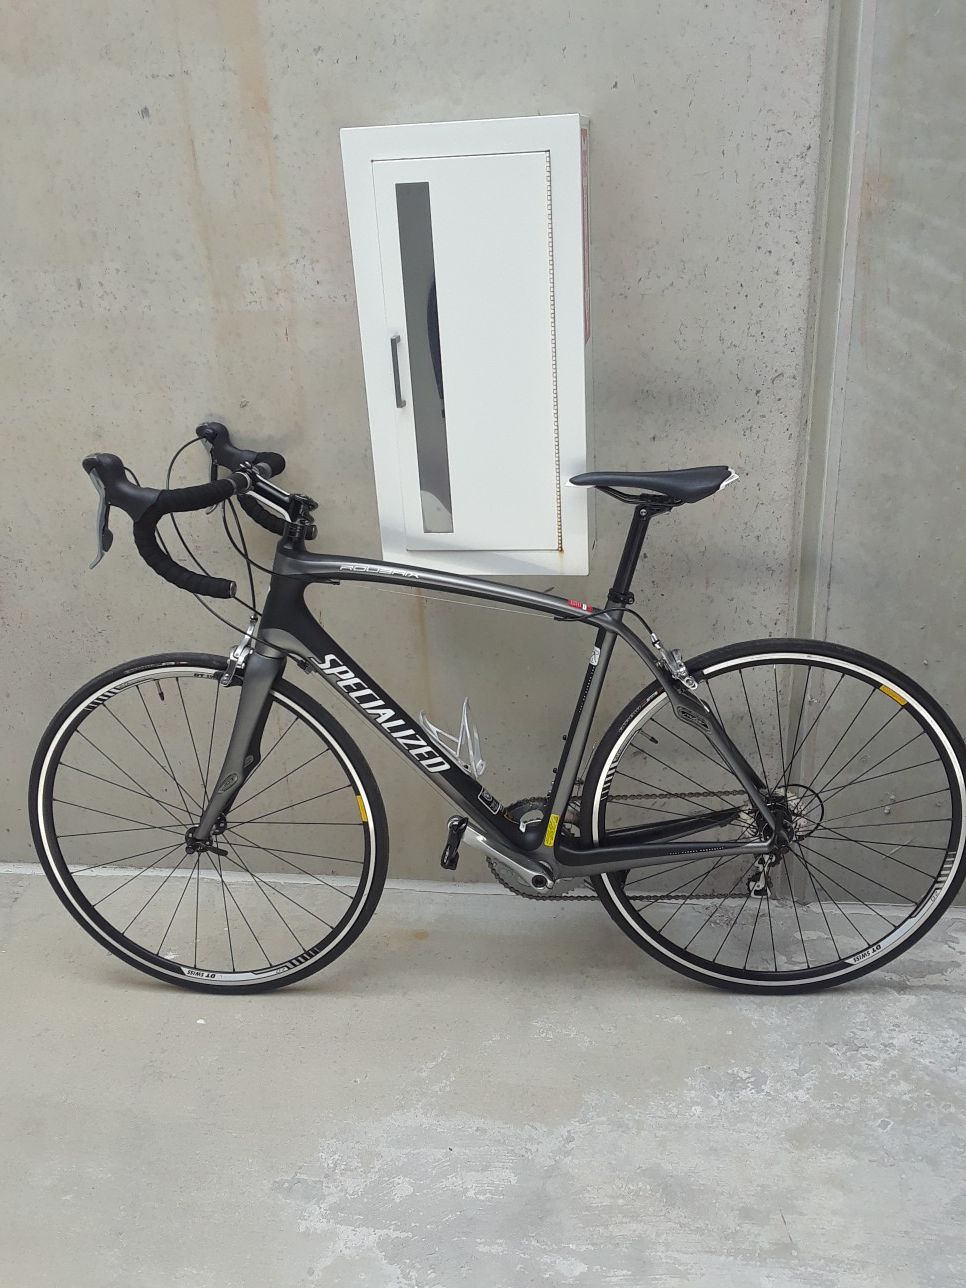 New condition Specialized Roubaix